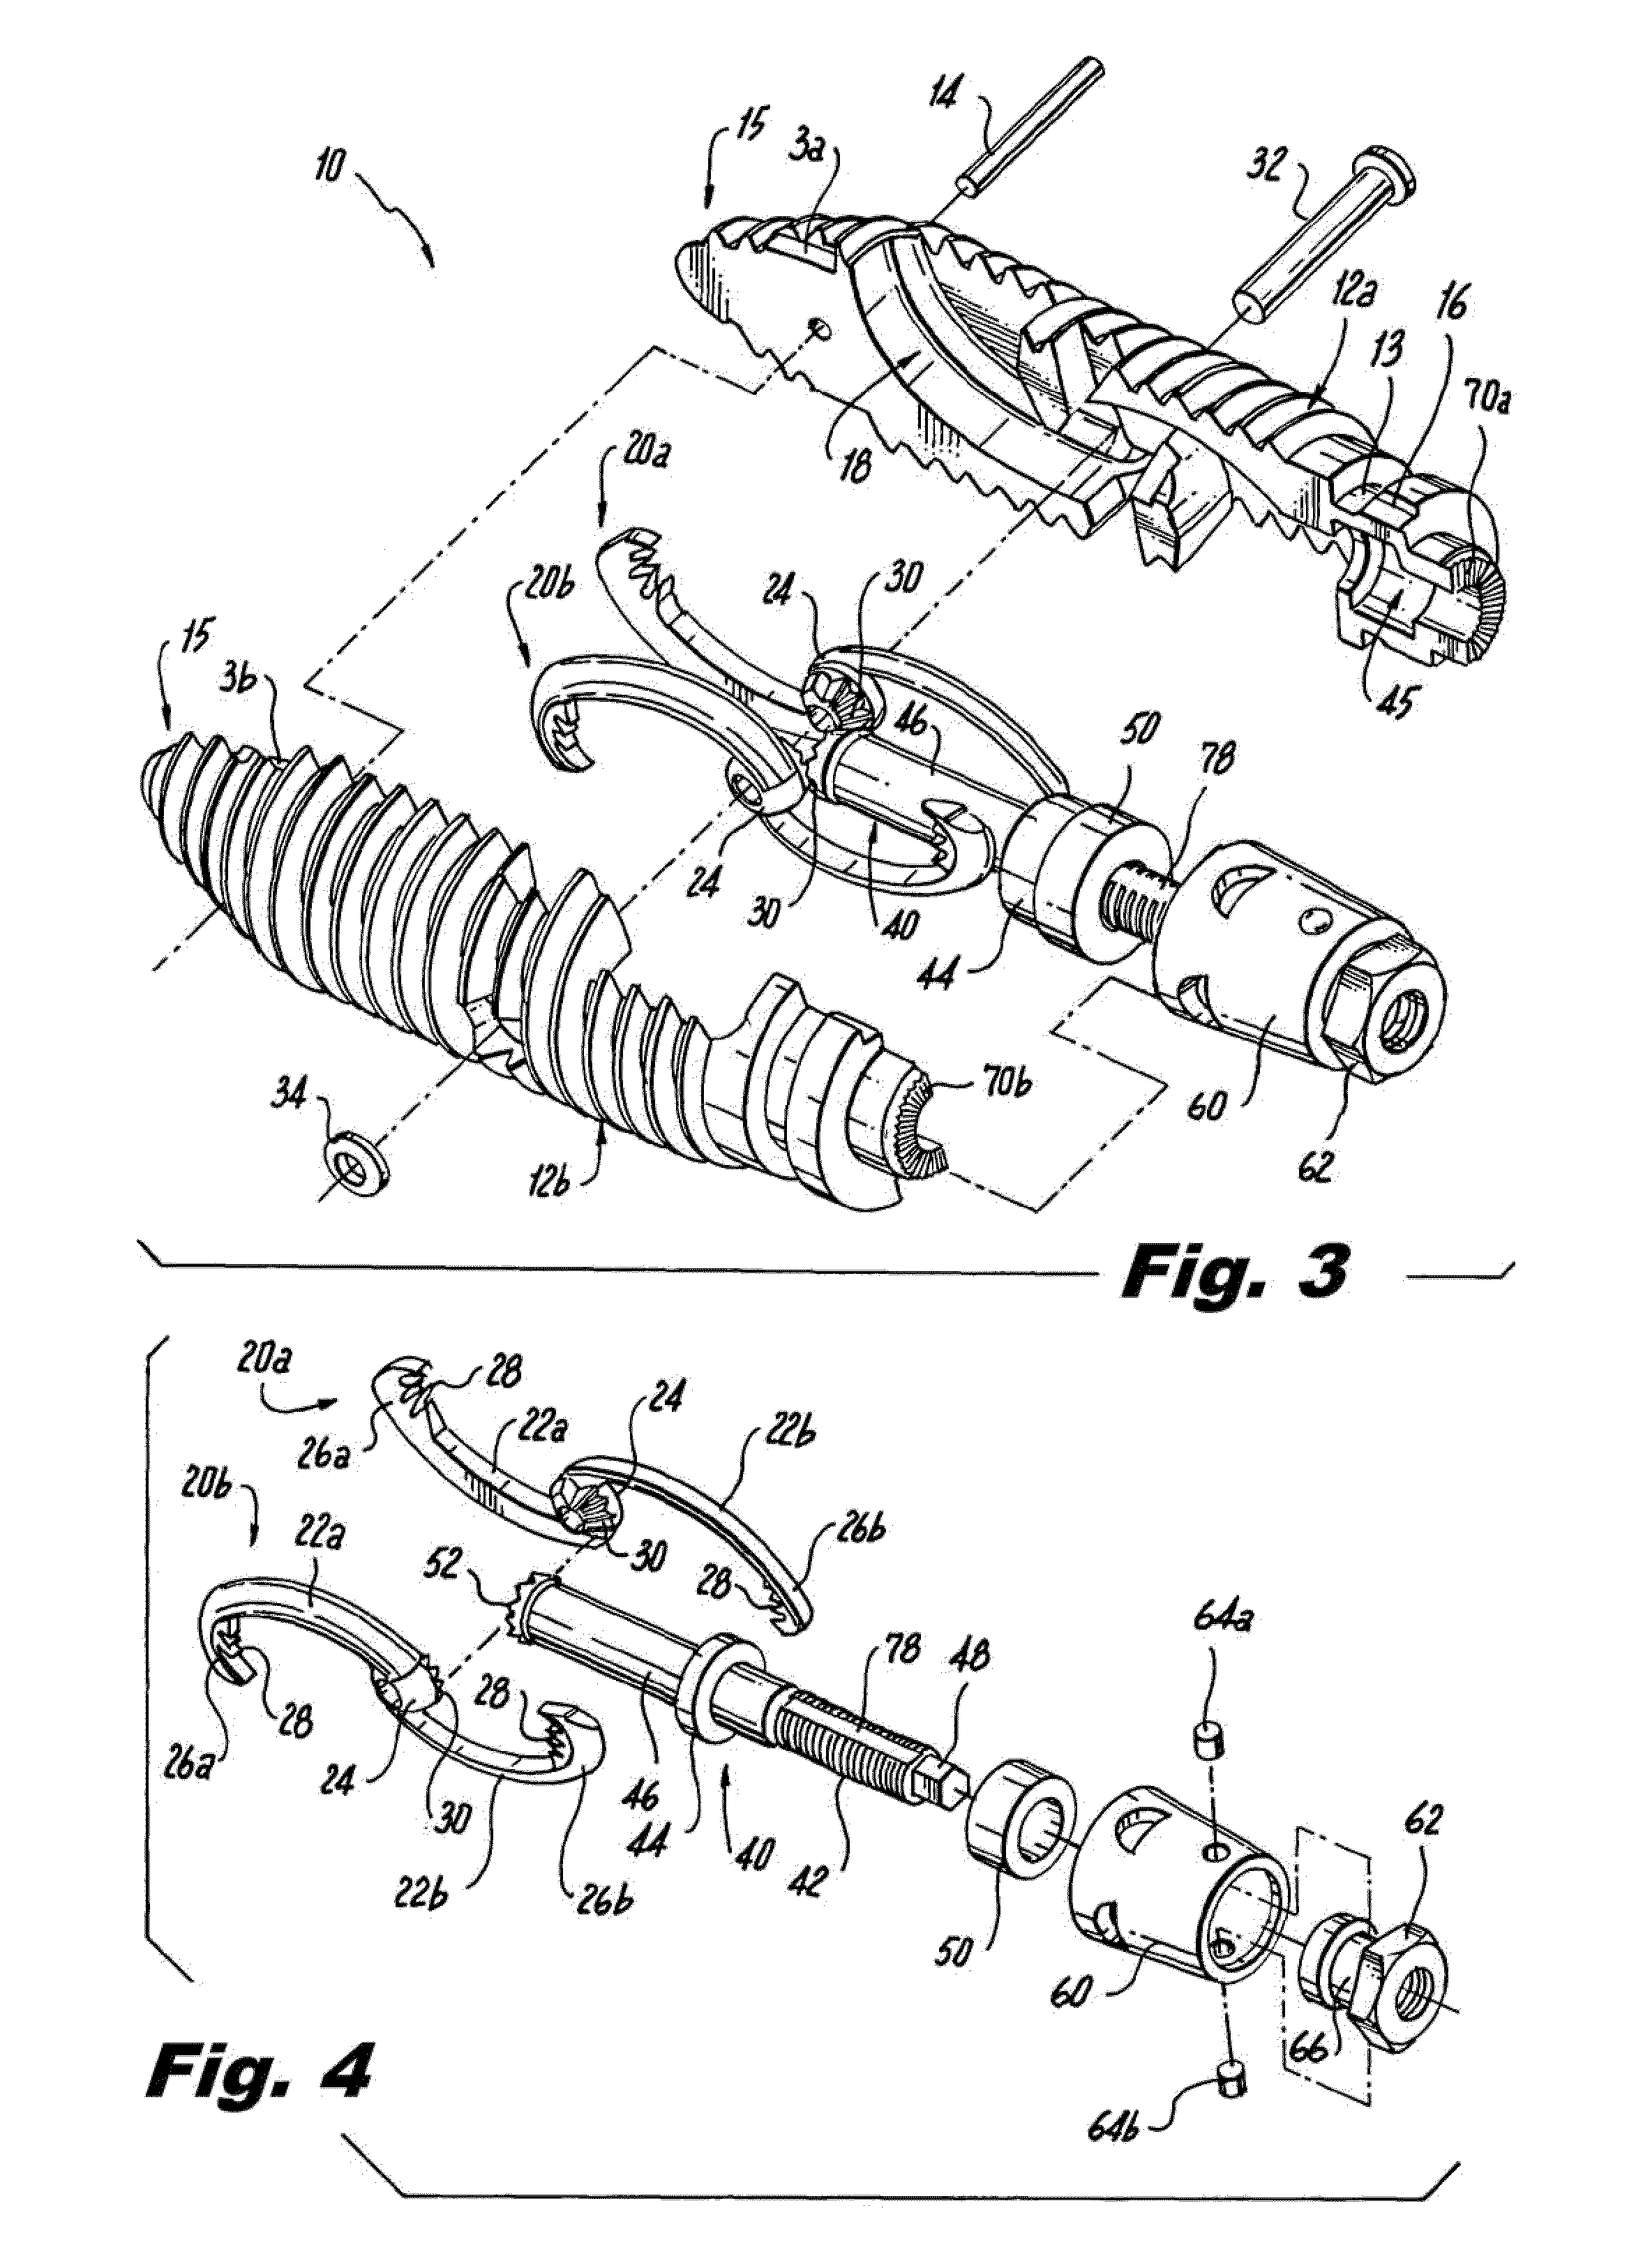 Interspinous process implants having deployable engagement arms